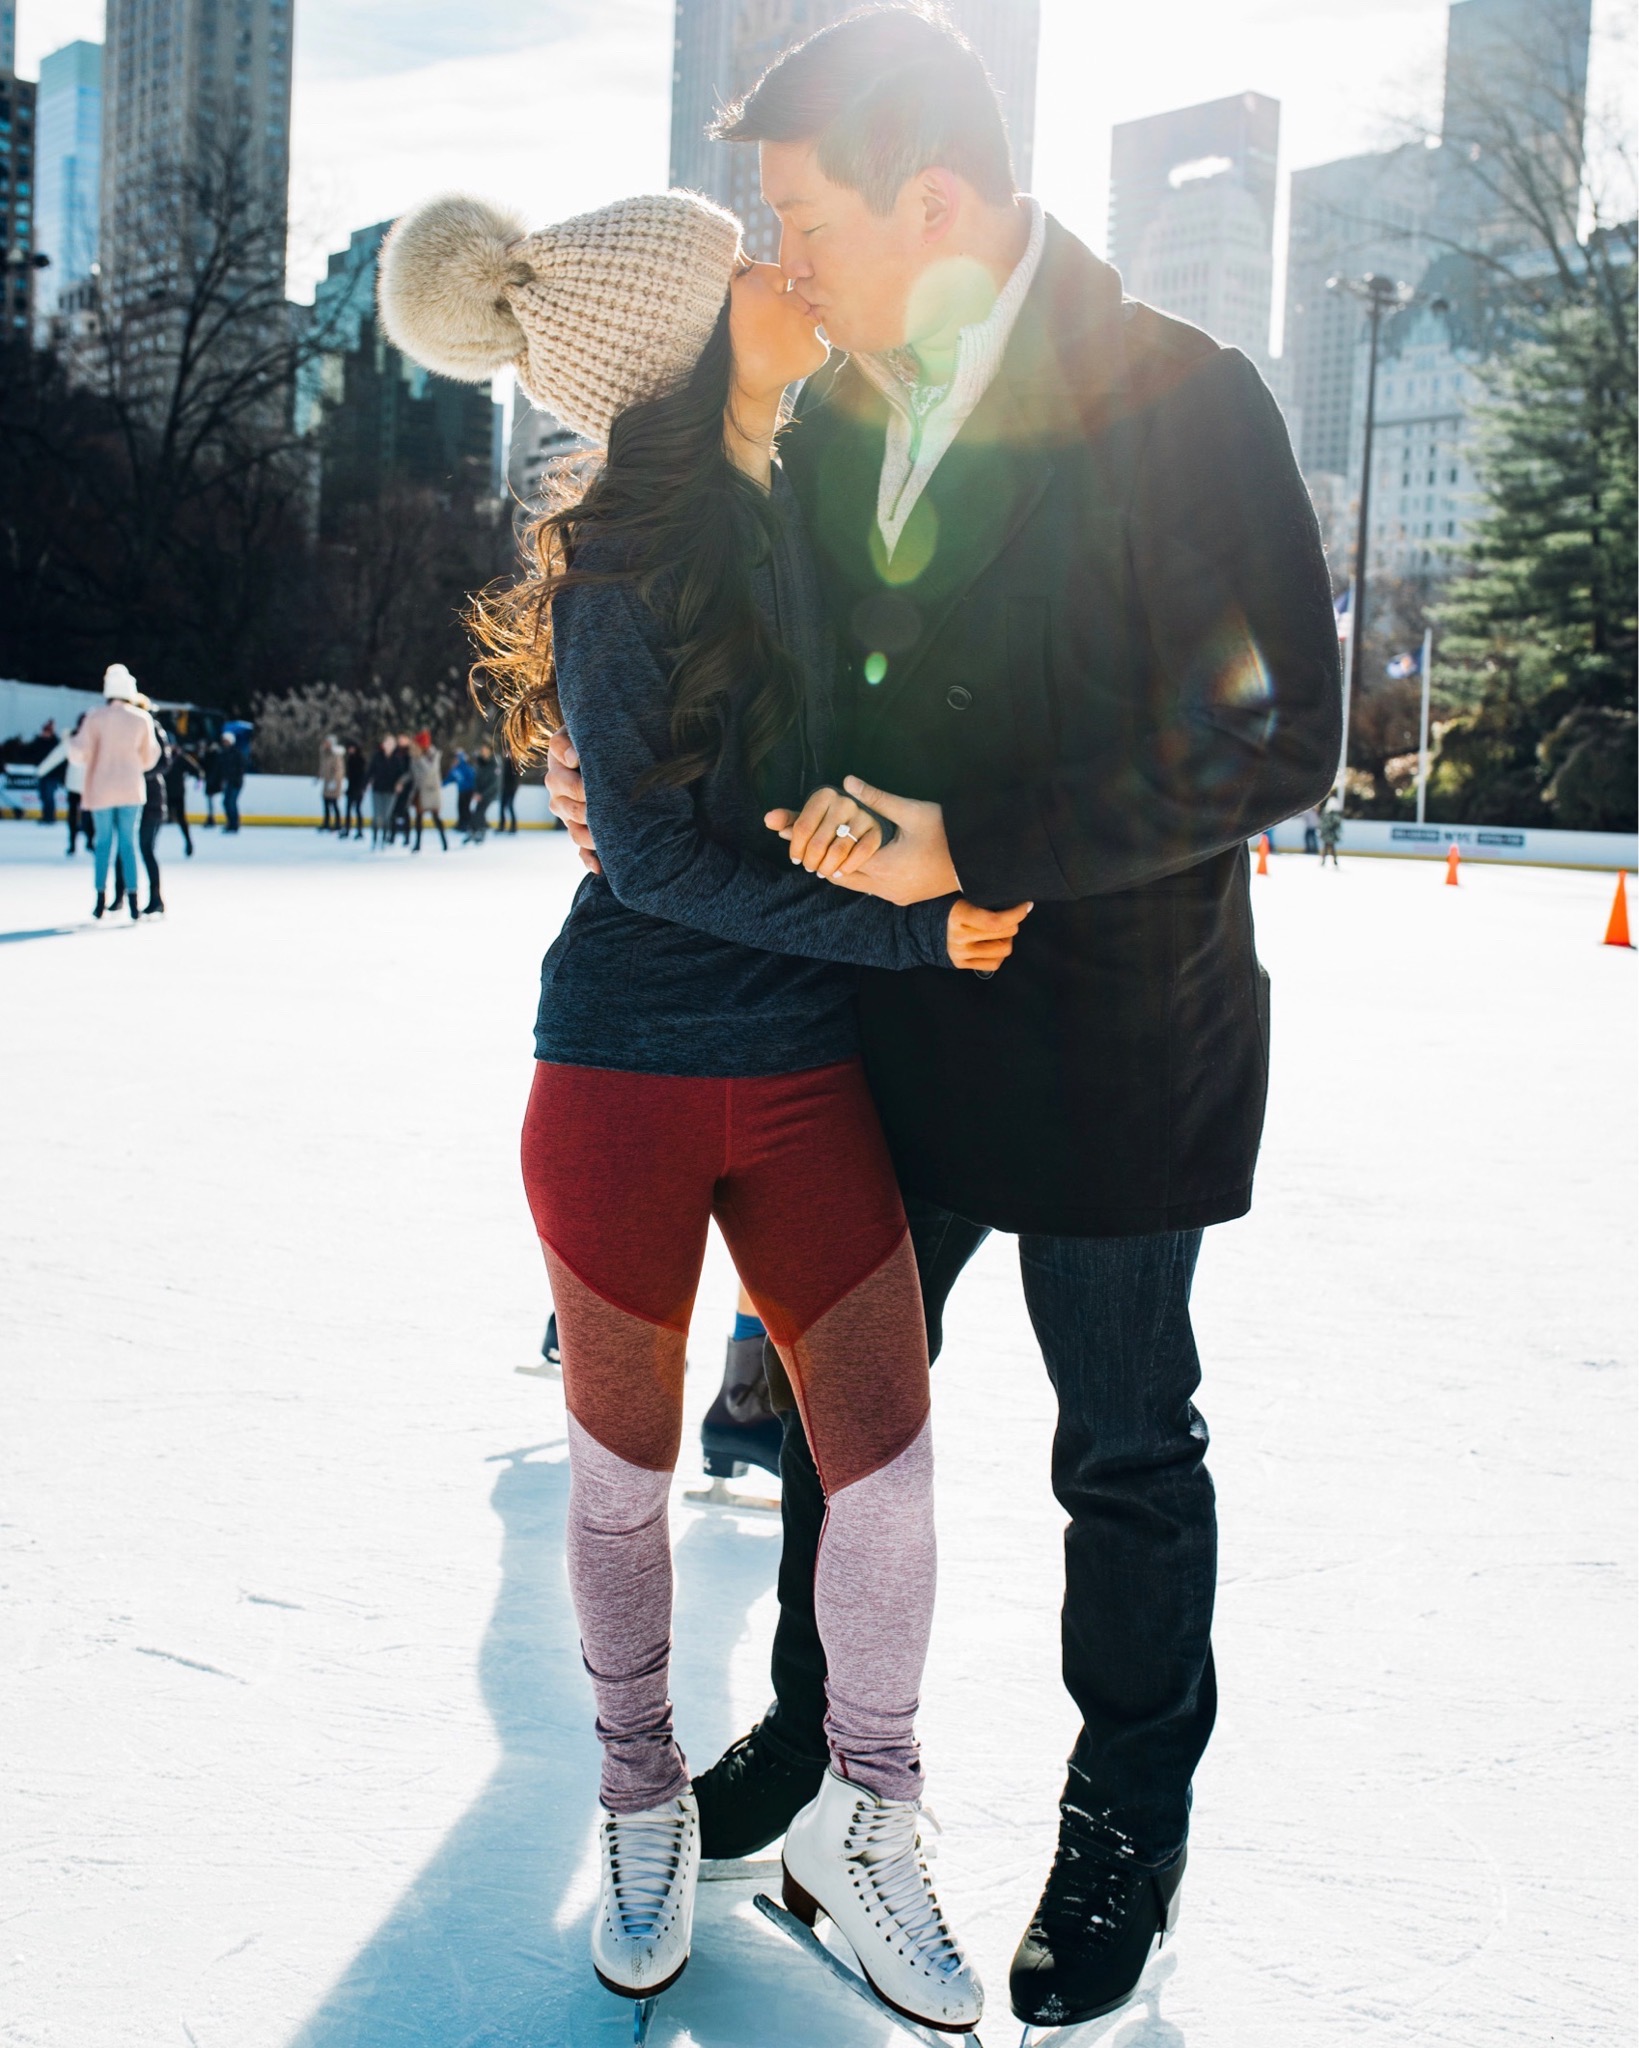 Surprise ice skating proposal at Wollman Rink in Central Park with James Allen ring